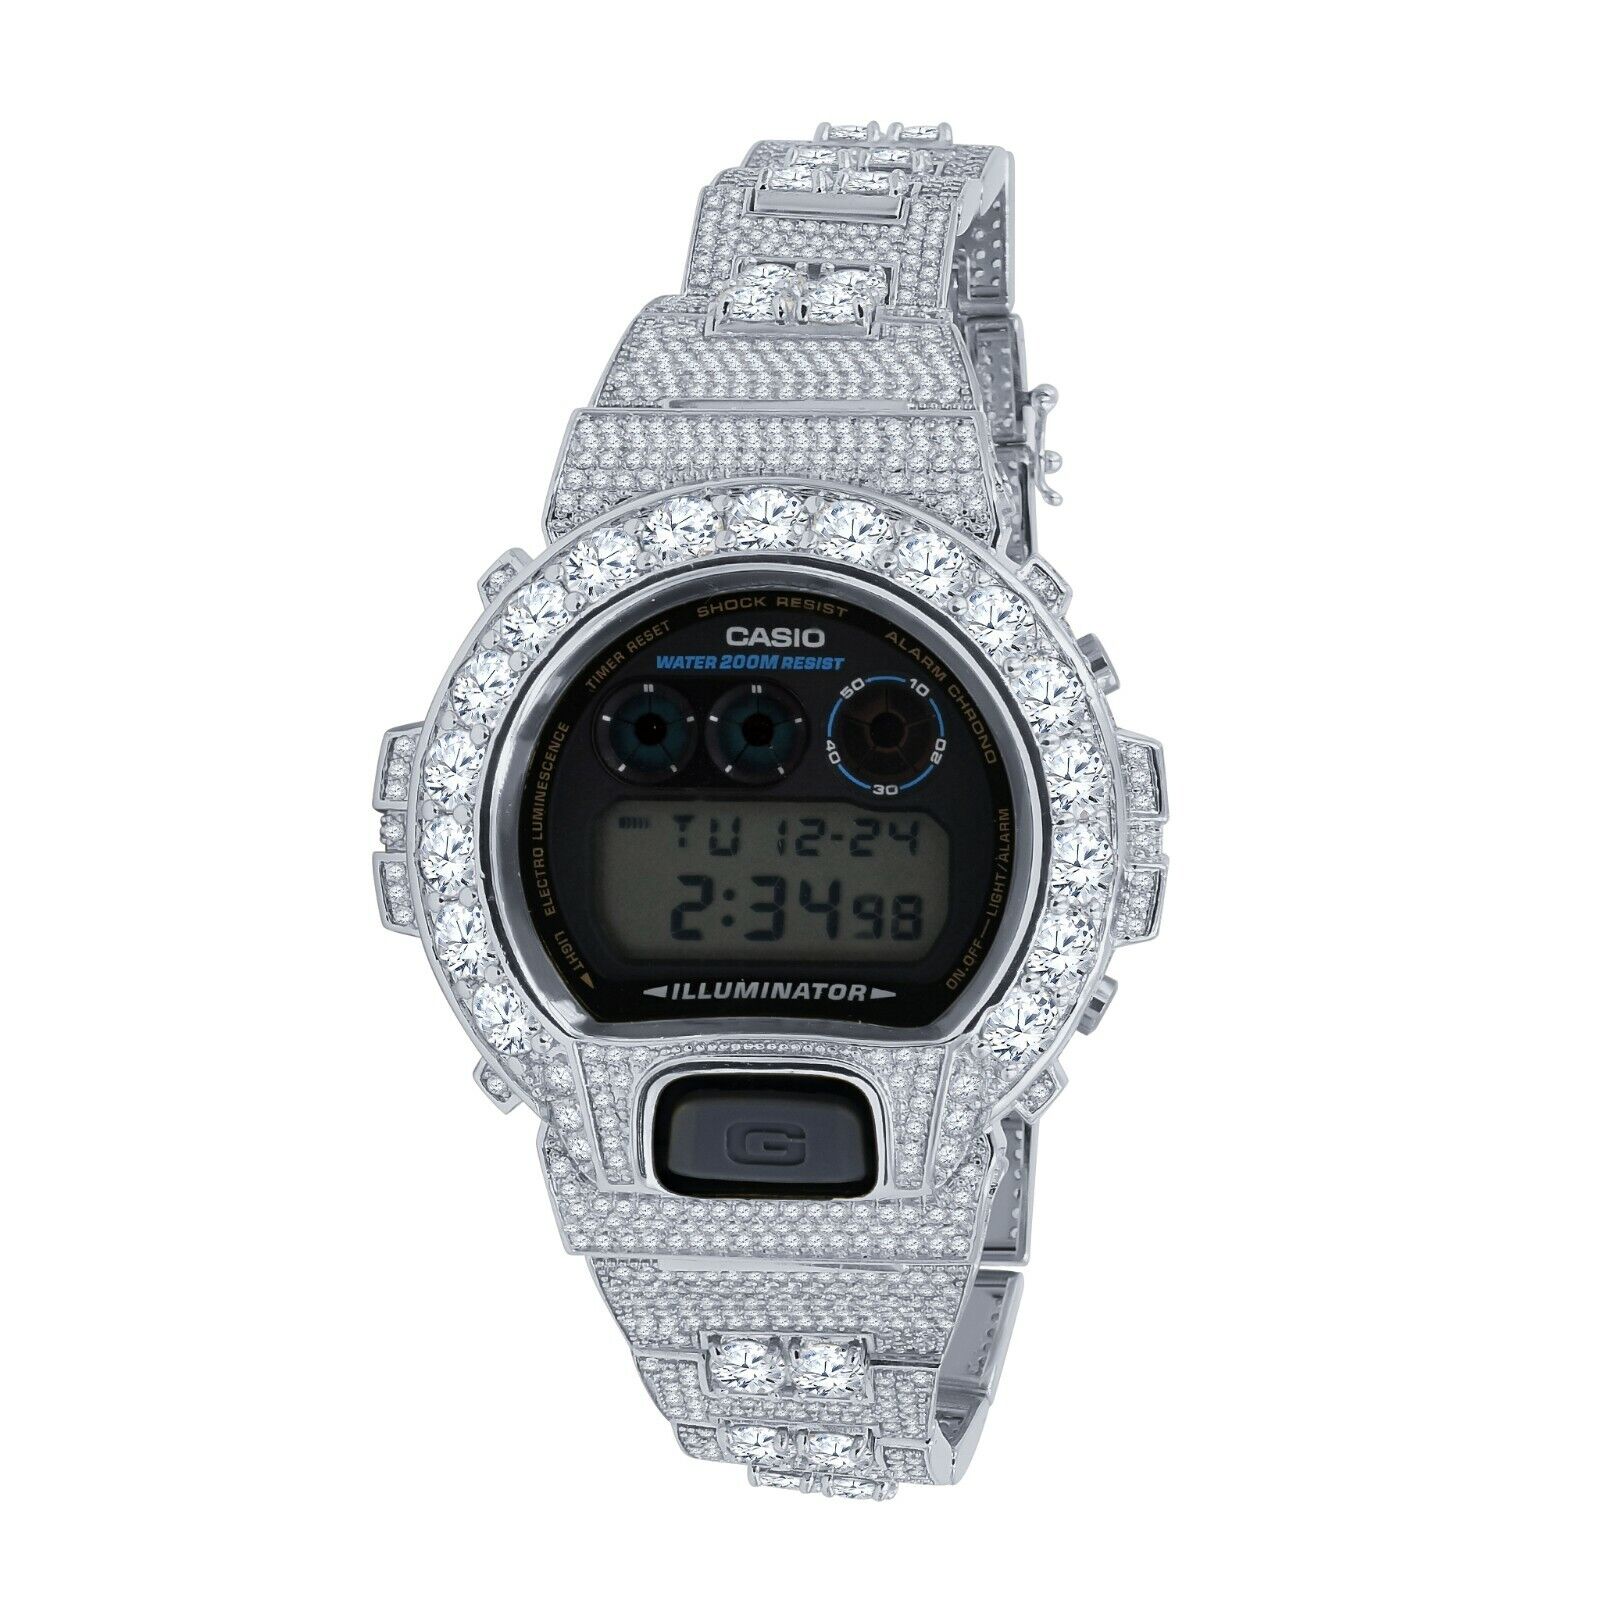 Pre-owned Casio Authentic Custom  G-shock Dw6900 Solitaire Bezel Watch 18k White Gold Tone